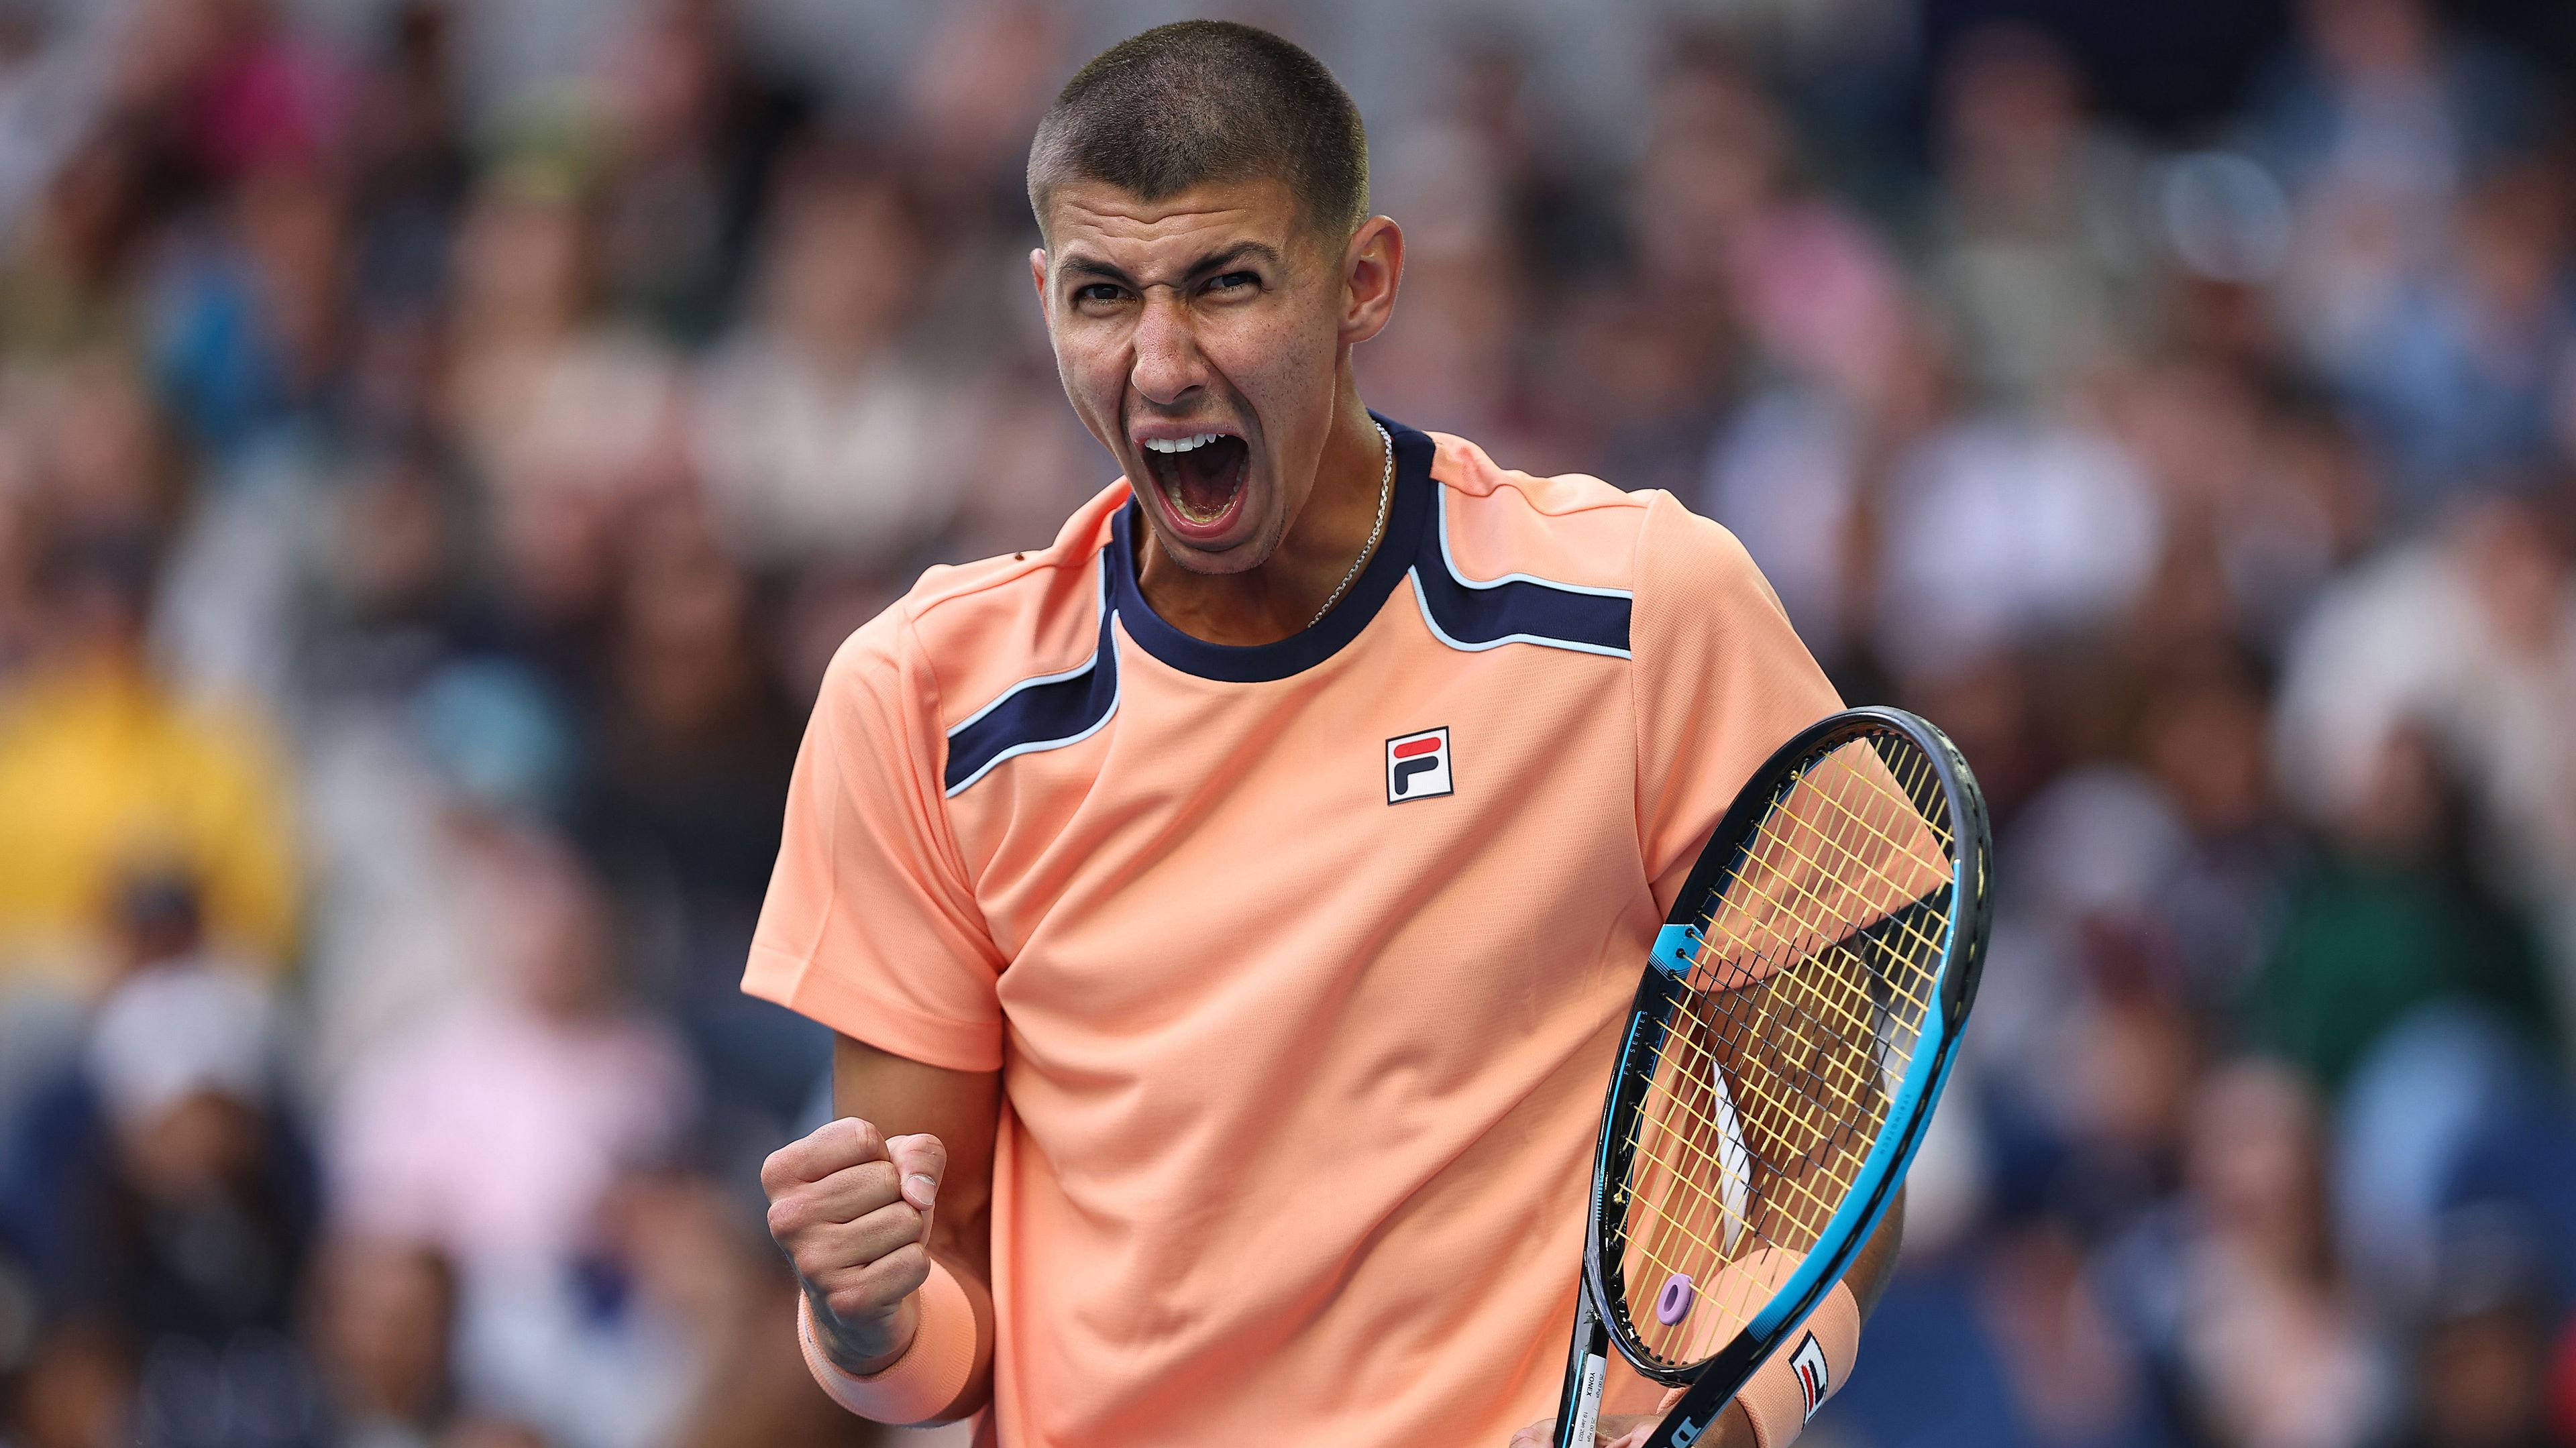 Alexei Popyrin reacts after winning a big point against Taylor Fritz in the second round of the 2023 Australian Open.